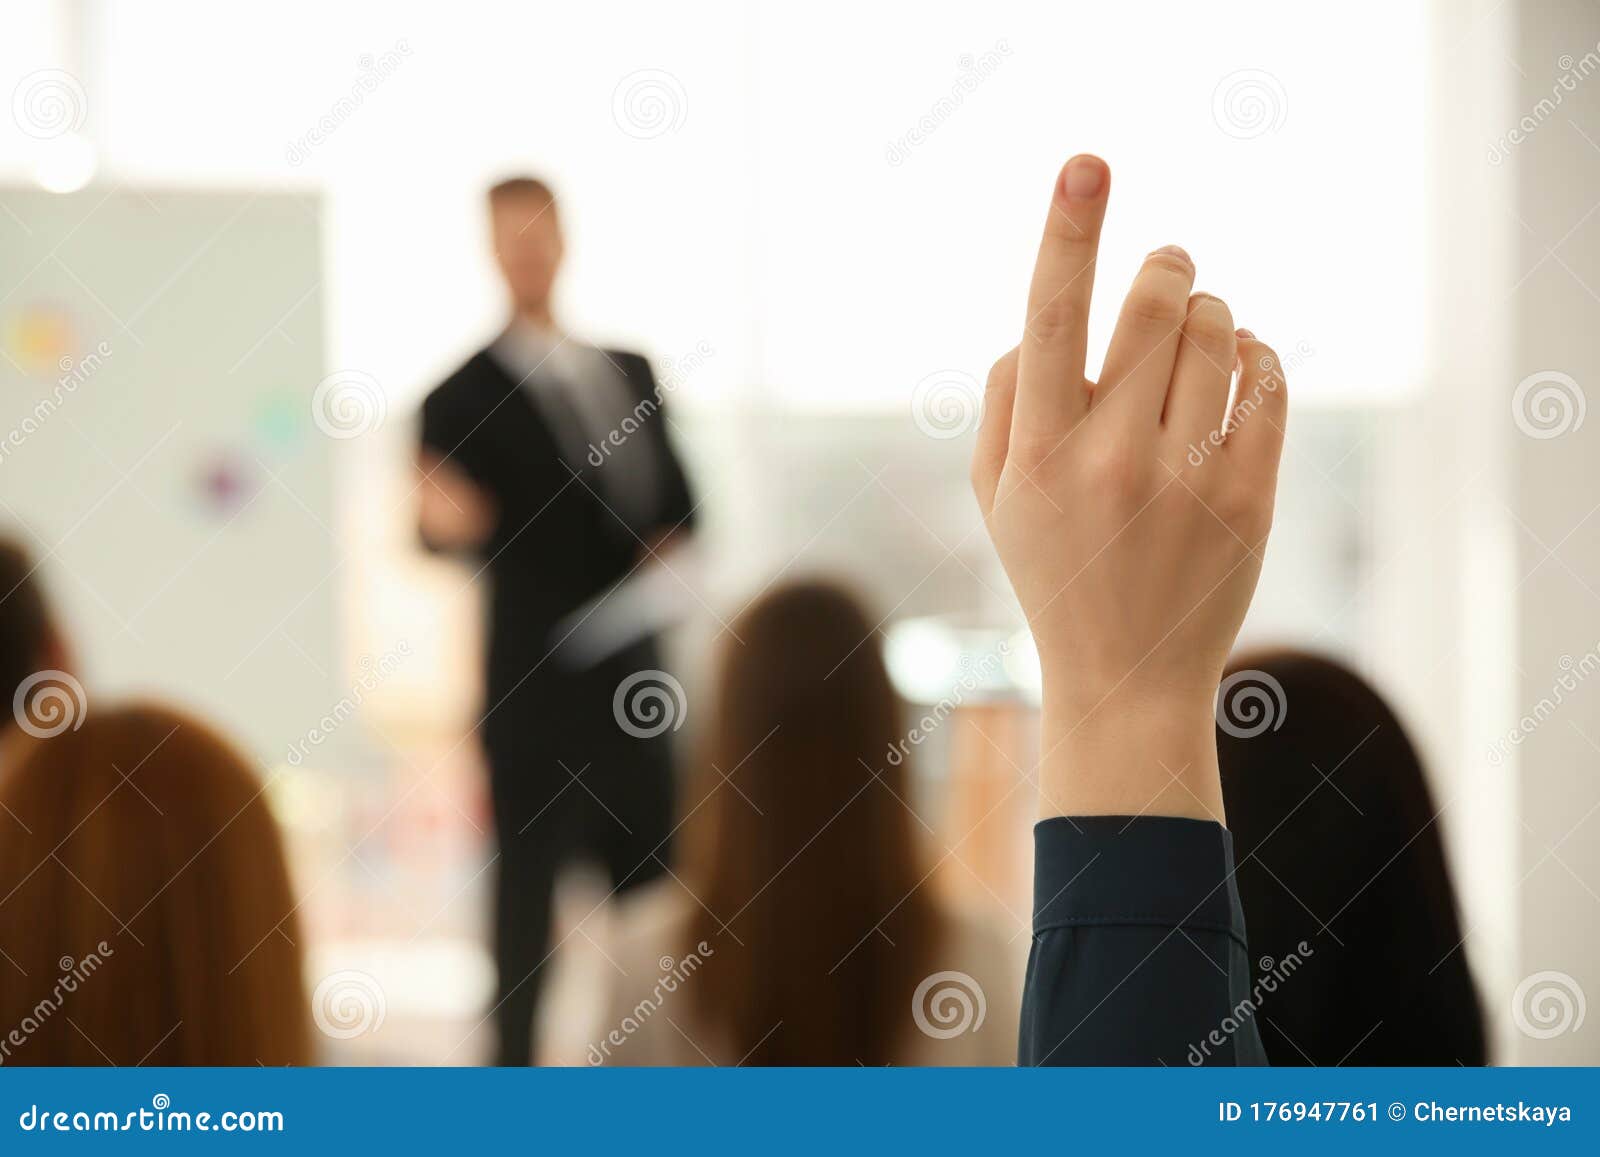 young woman raising hand to ask question at business training, closeup